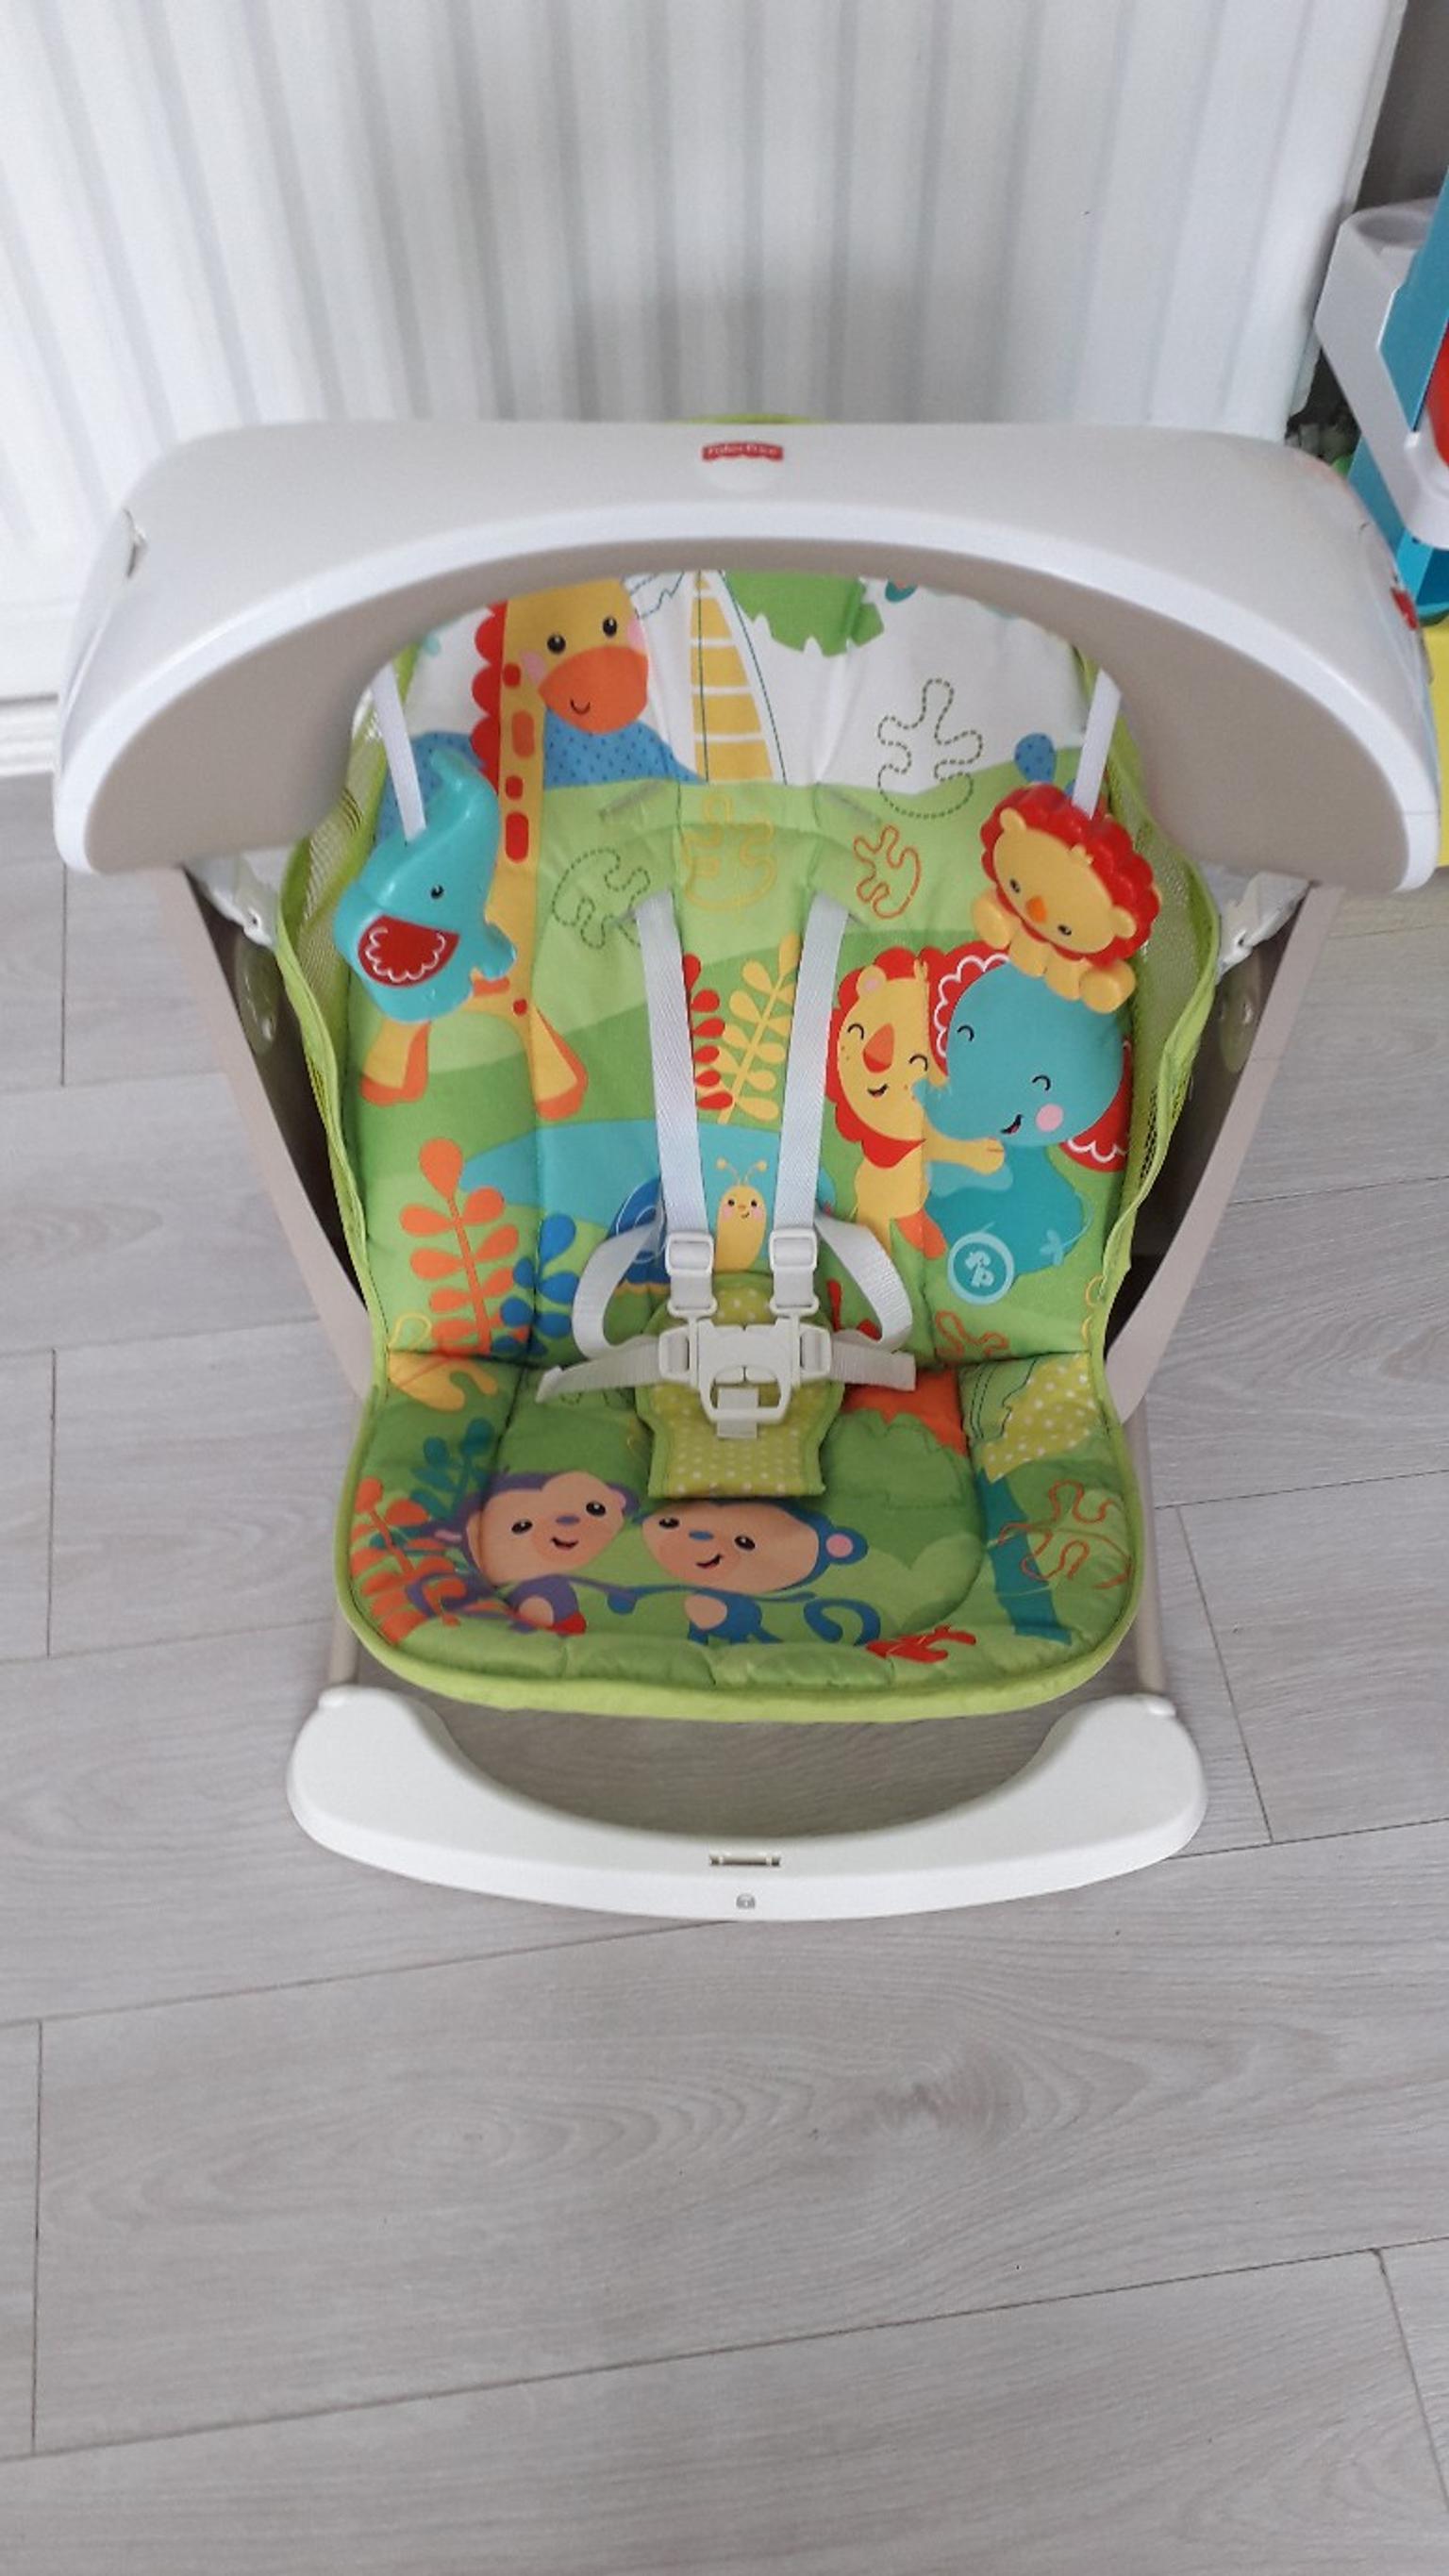 Baby Rainforest Swing Vibrating Chair In Canterbury For 15 00